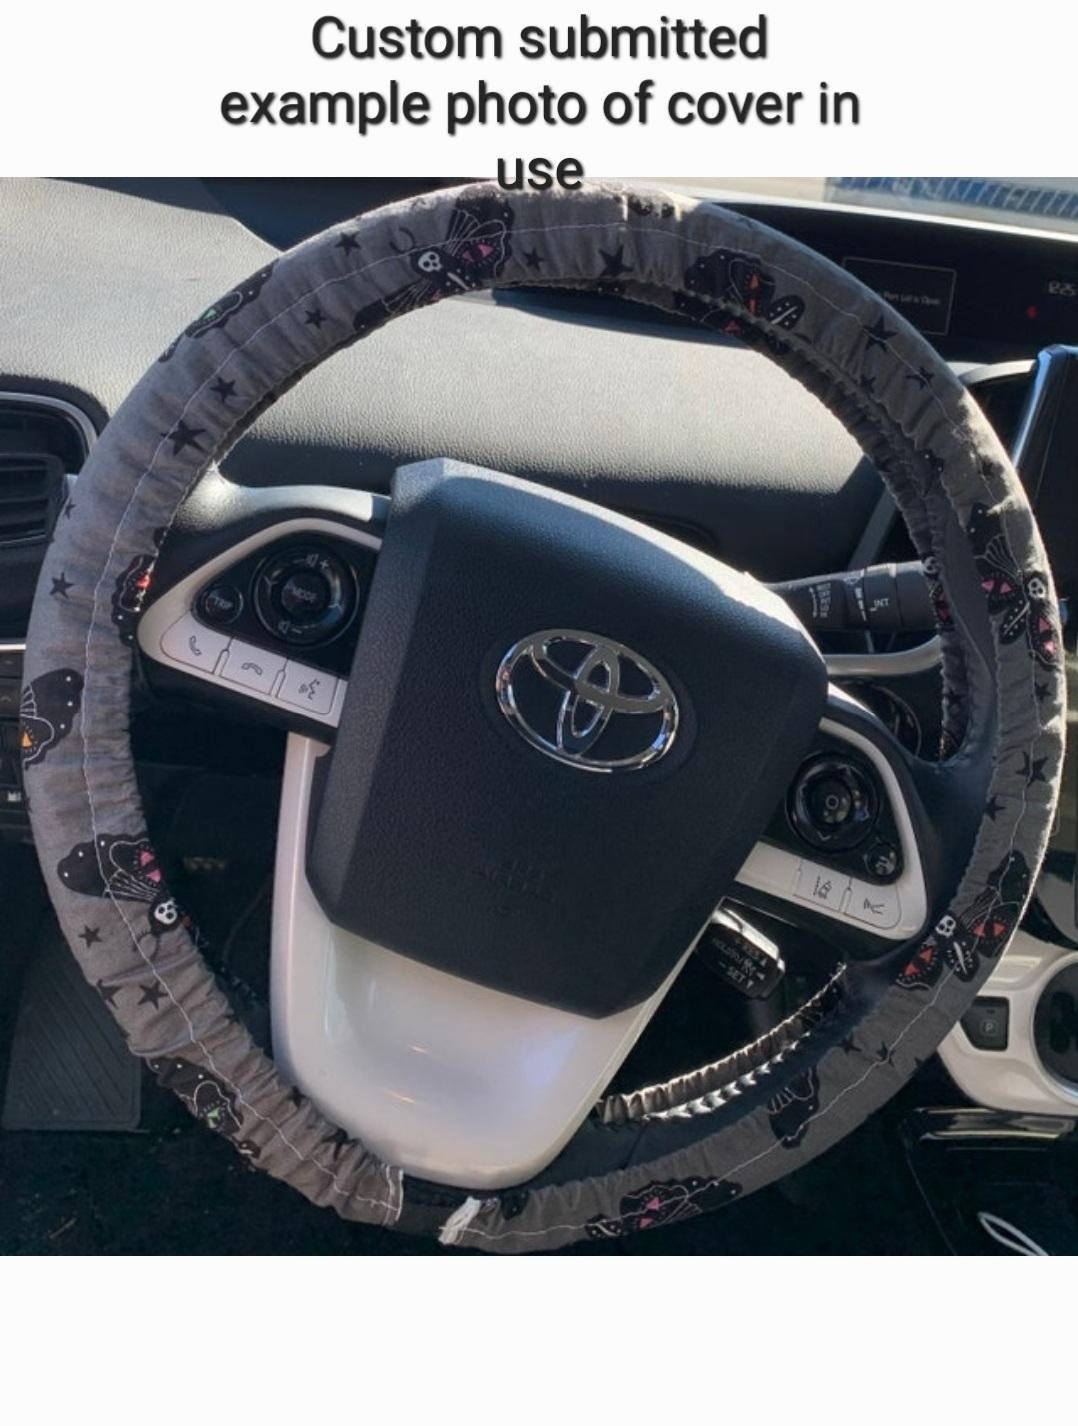 Sun/Moon Steering Wheel Cover, Handmade - Harlow's Store and Garden Gifts